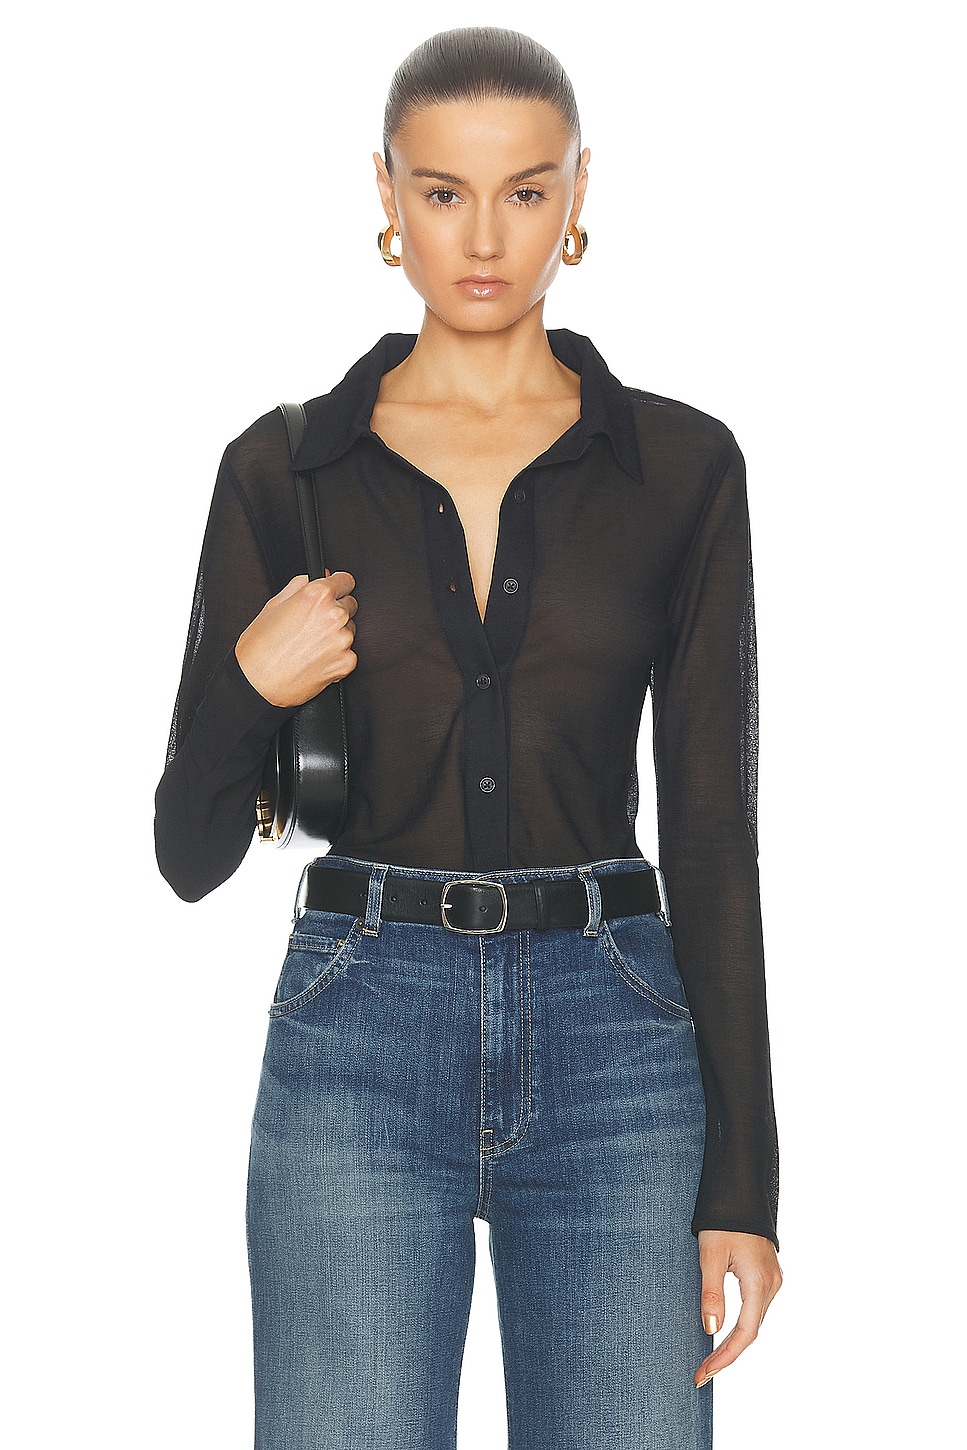 Mesh Knit Button Up Top in Black